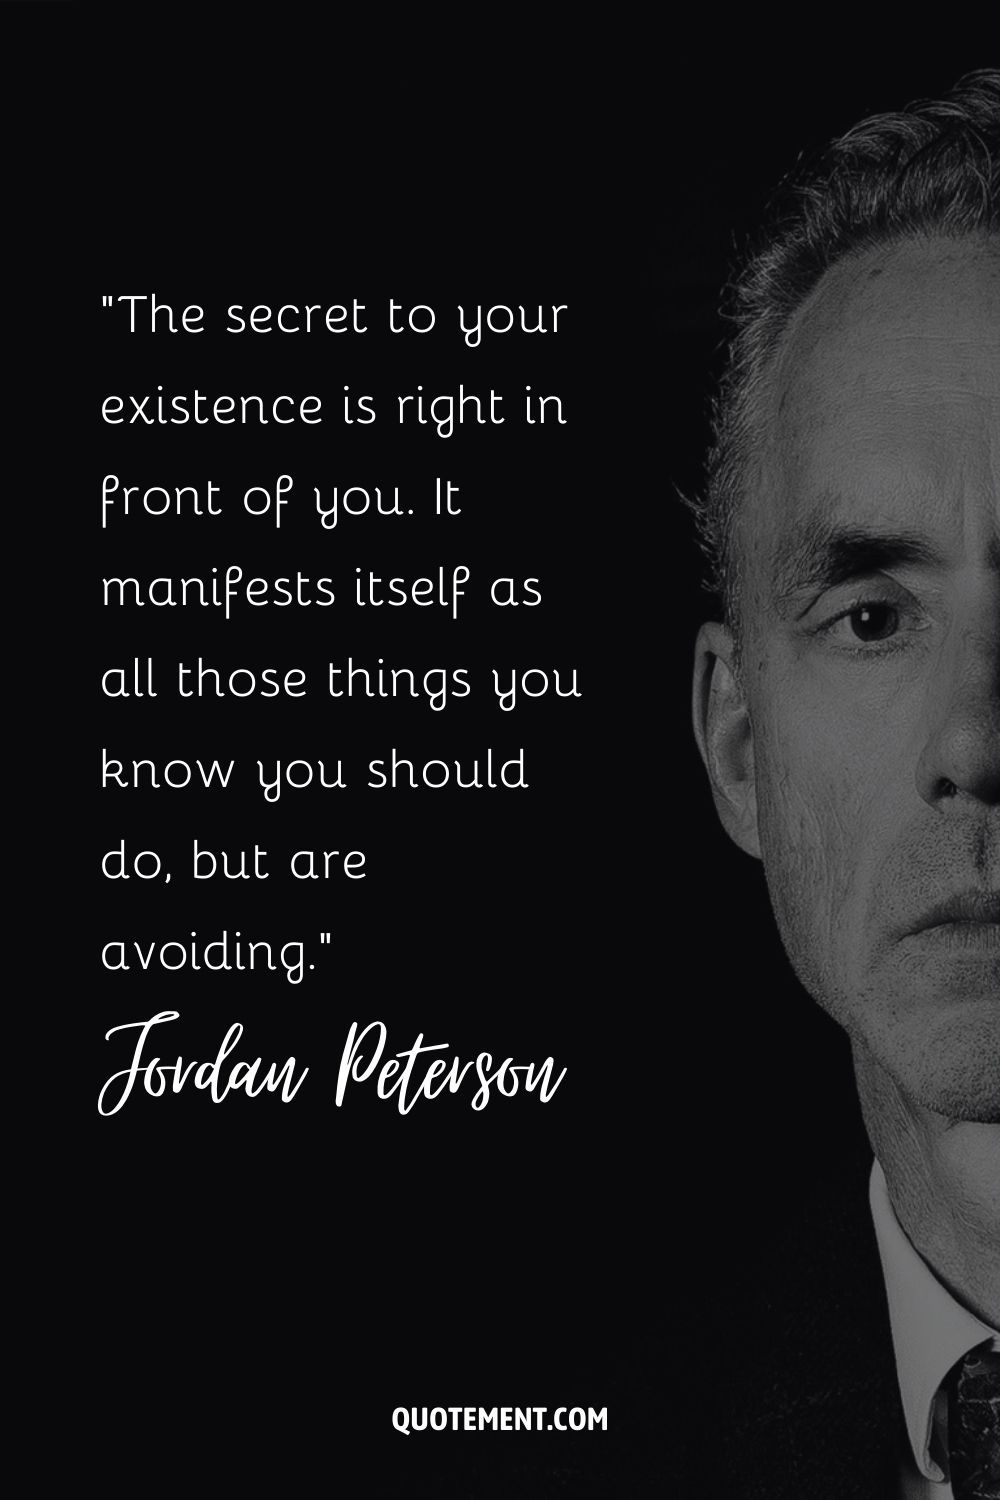 The secret to your existence is right in front of you. It manifests itself as all those things you know you should do, but are avoiding